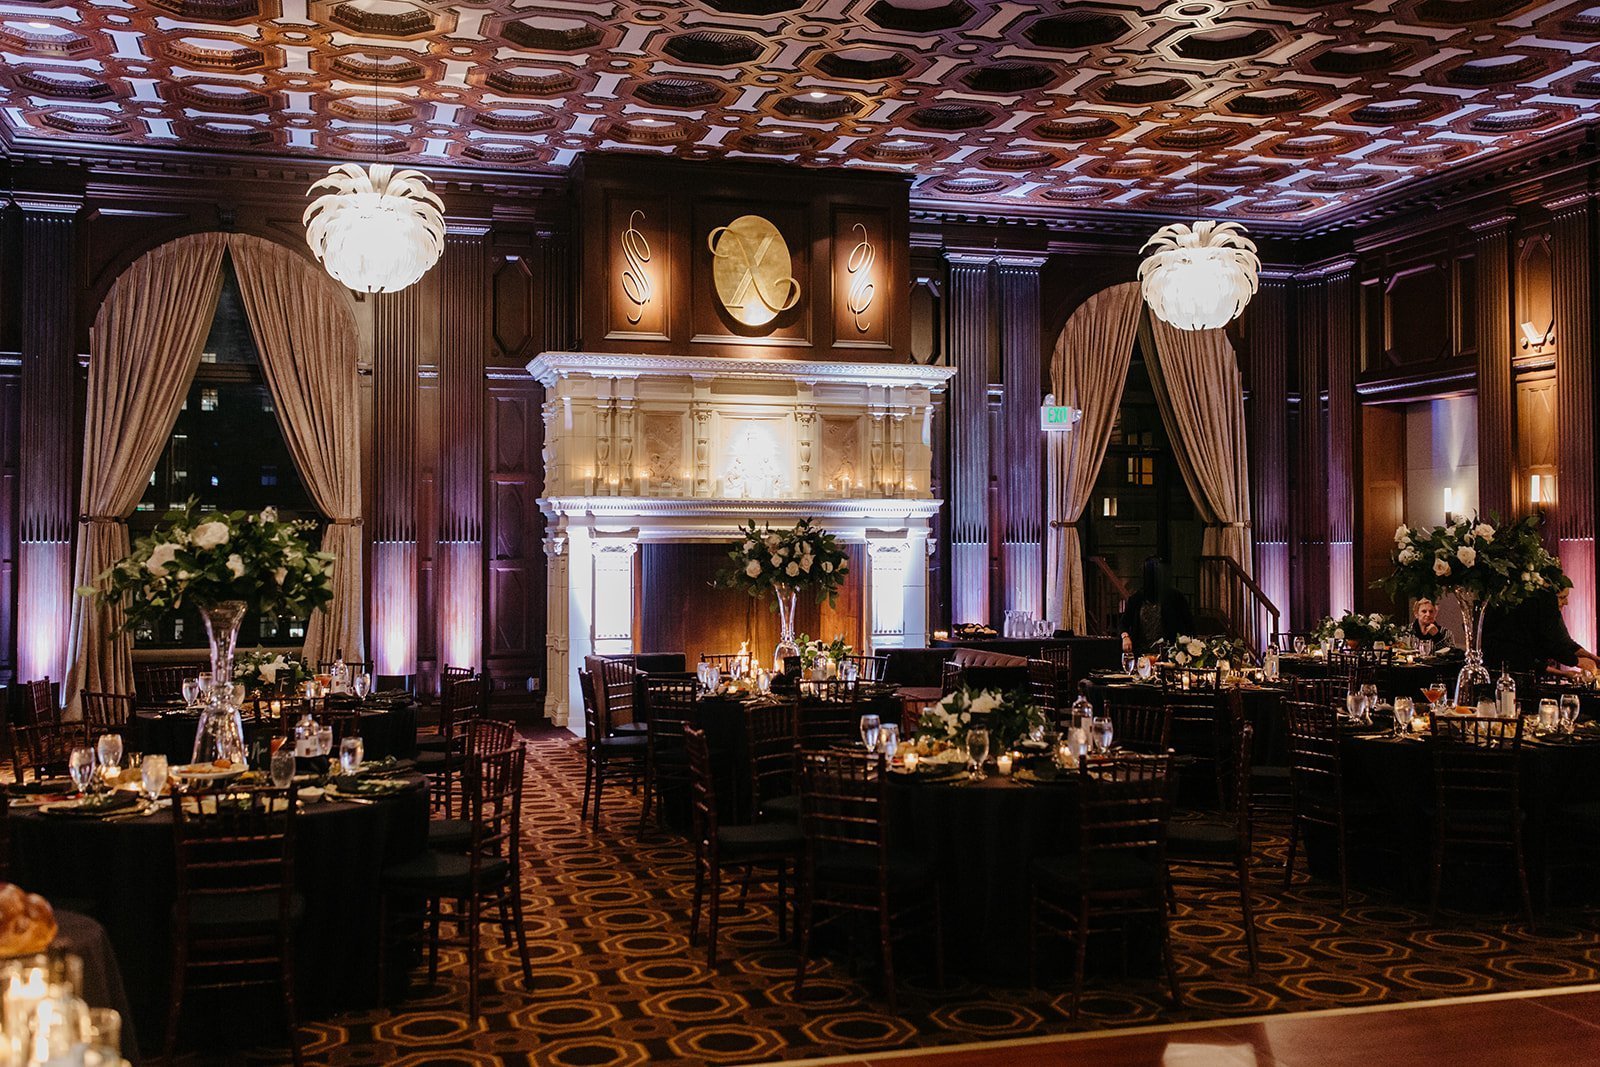 A black and white wedding inspiration. This Russian wedding was held at the Julia Morgan Ballroom in San Francisco. Ballroom wedding inspiration, black and white wedding theme, black wedding decorations.